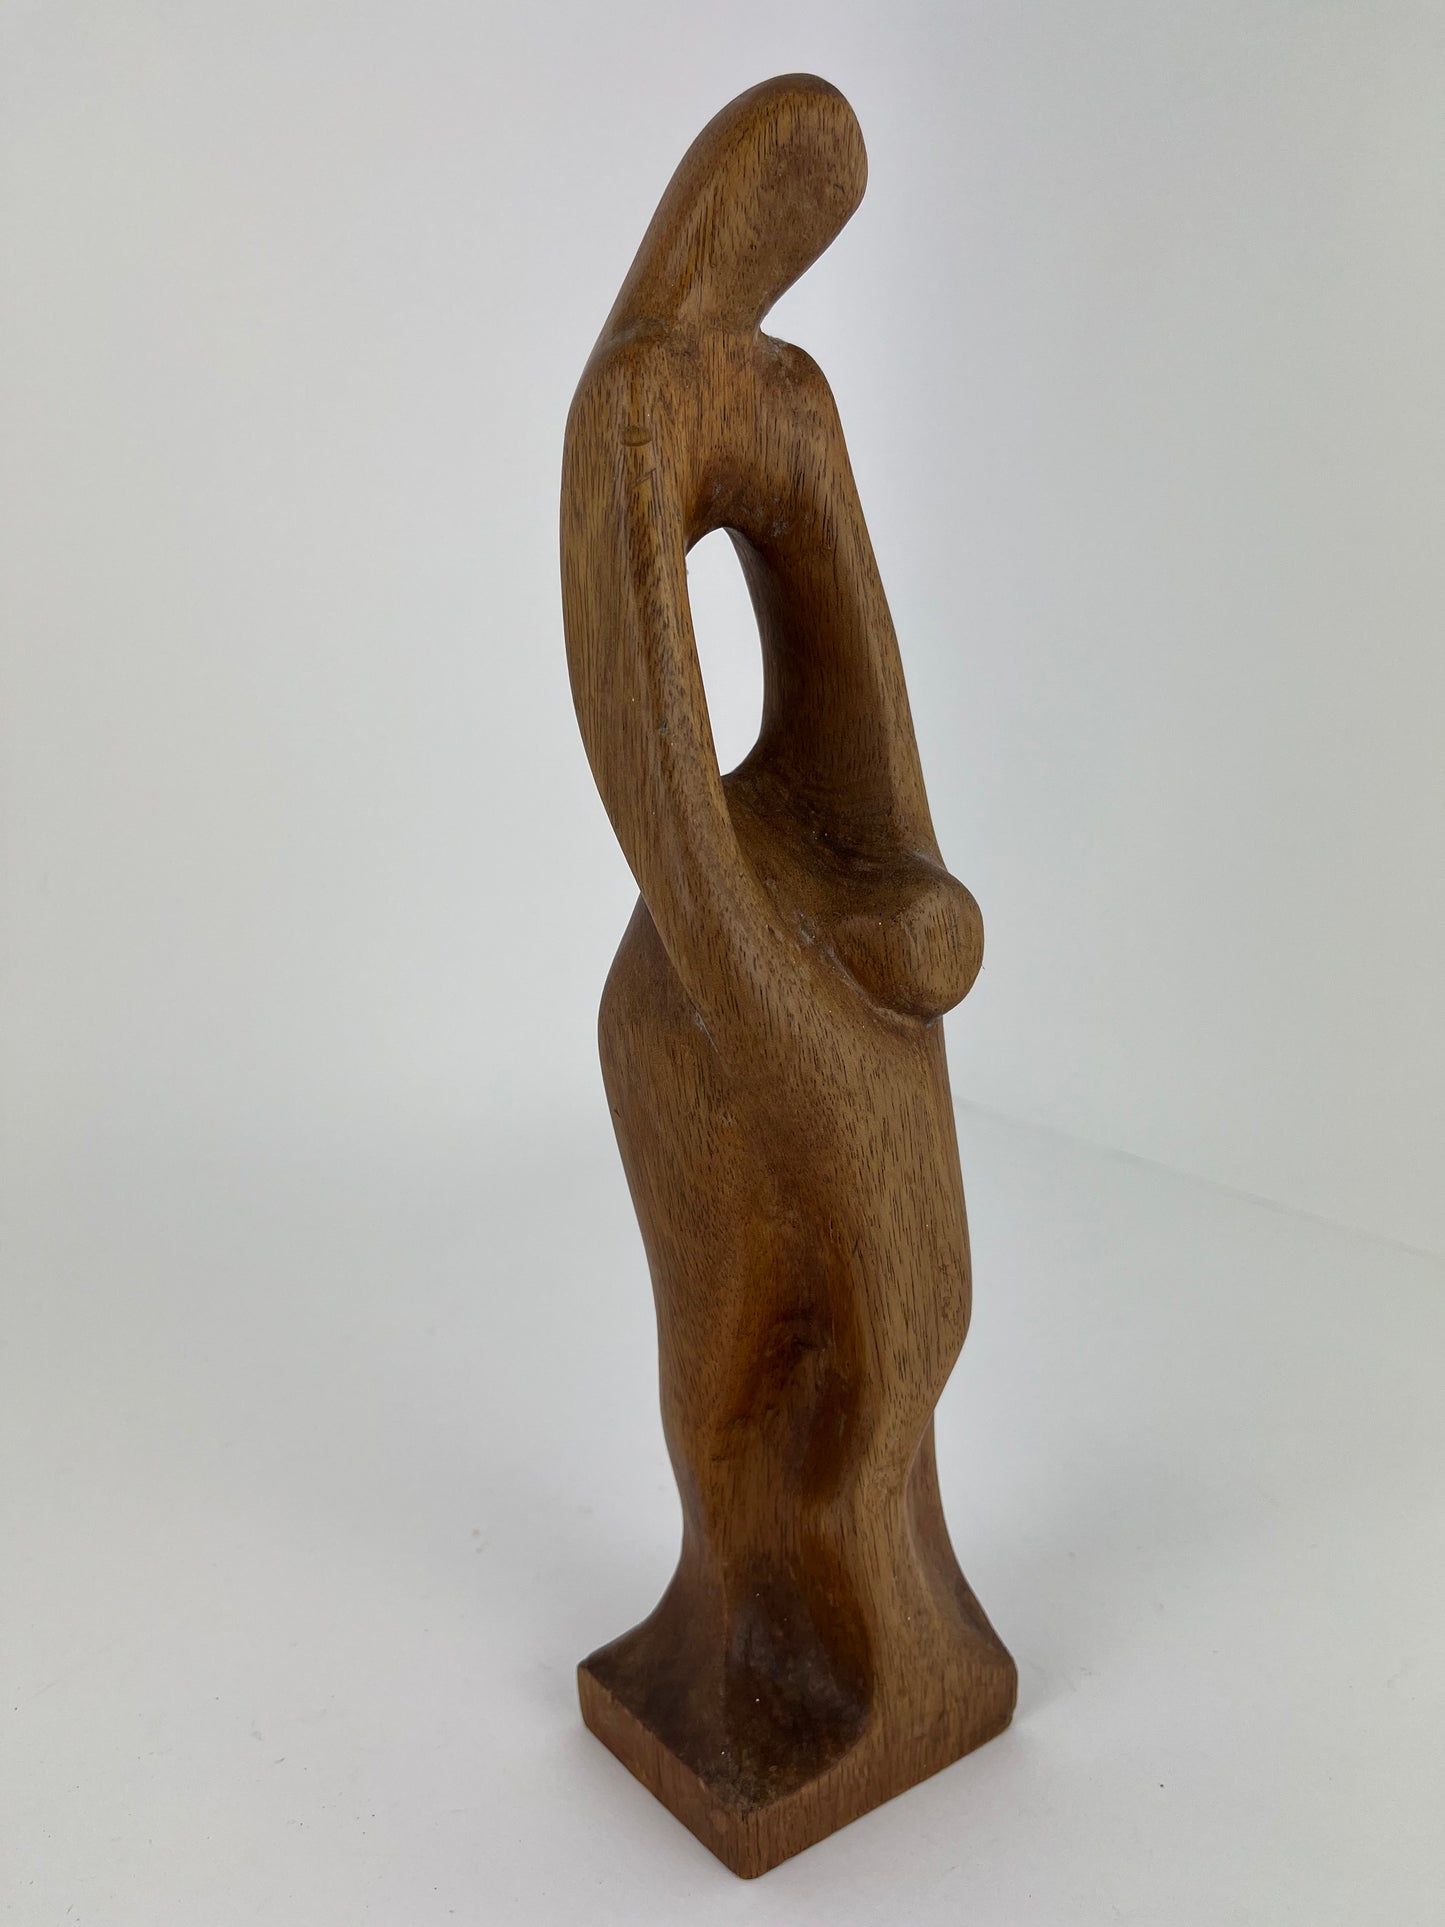 CARVED PARENT AND CHILD WOODEN SCULPTURE